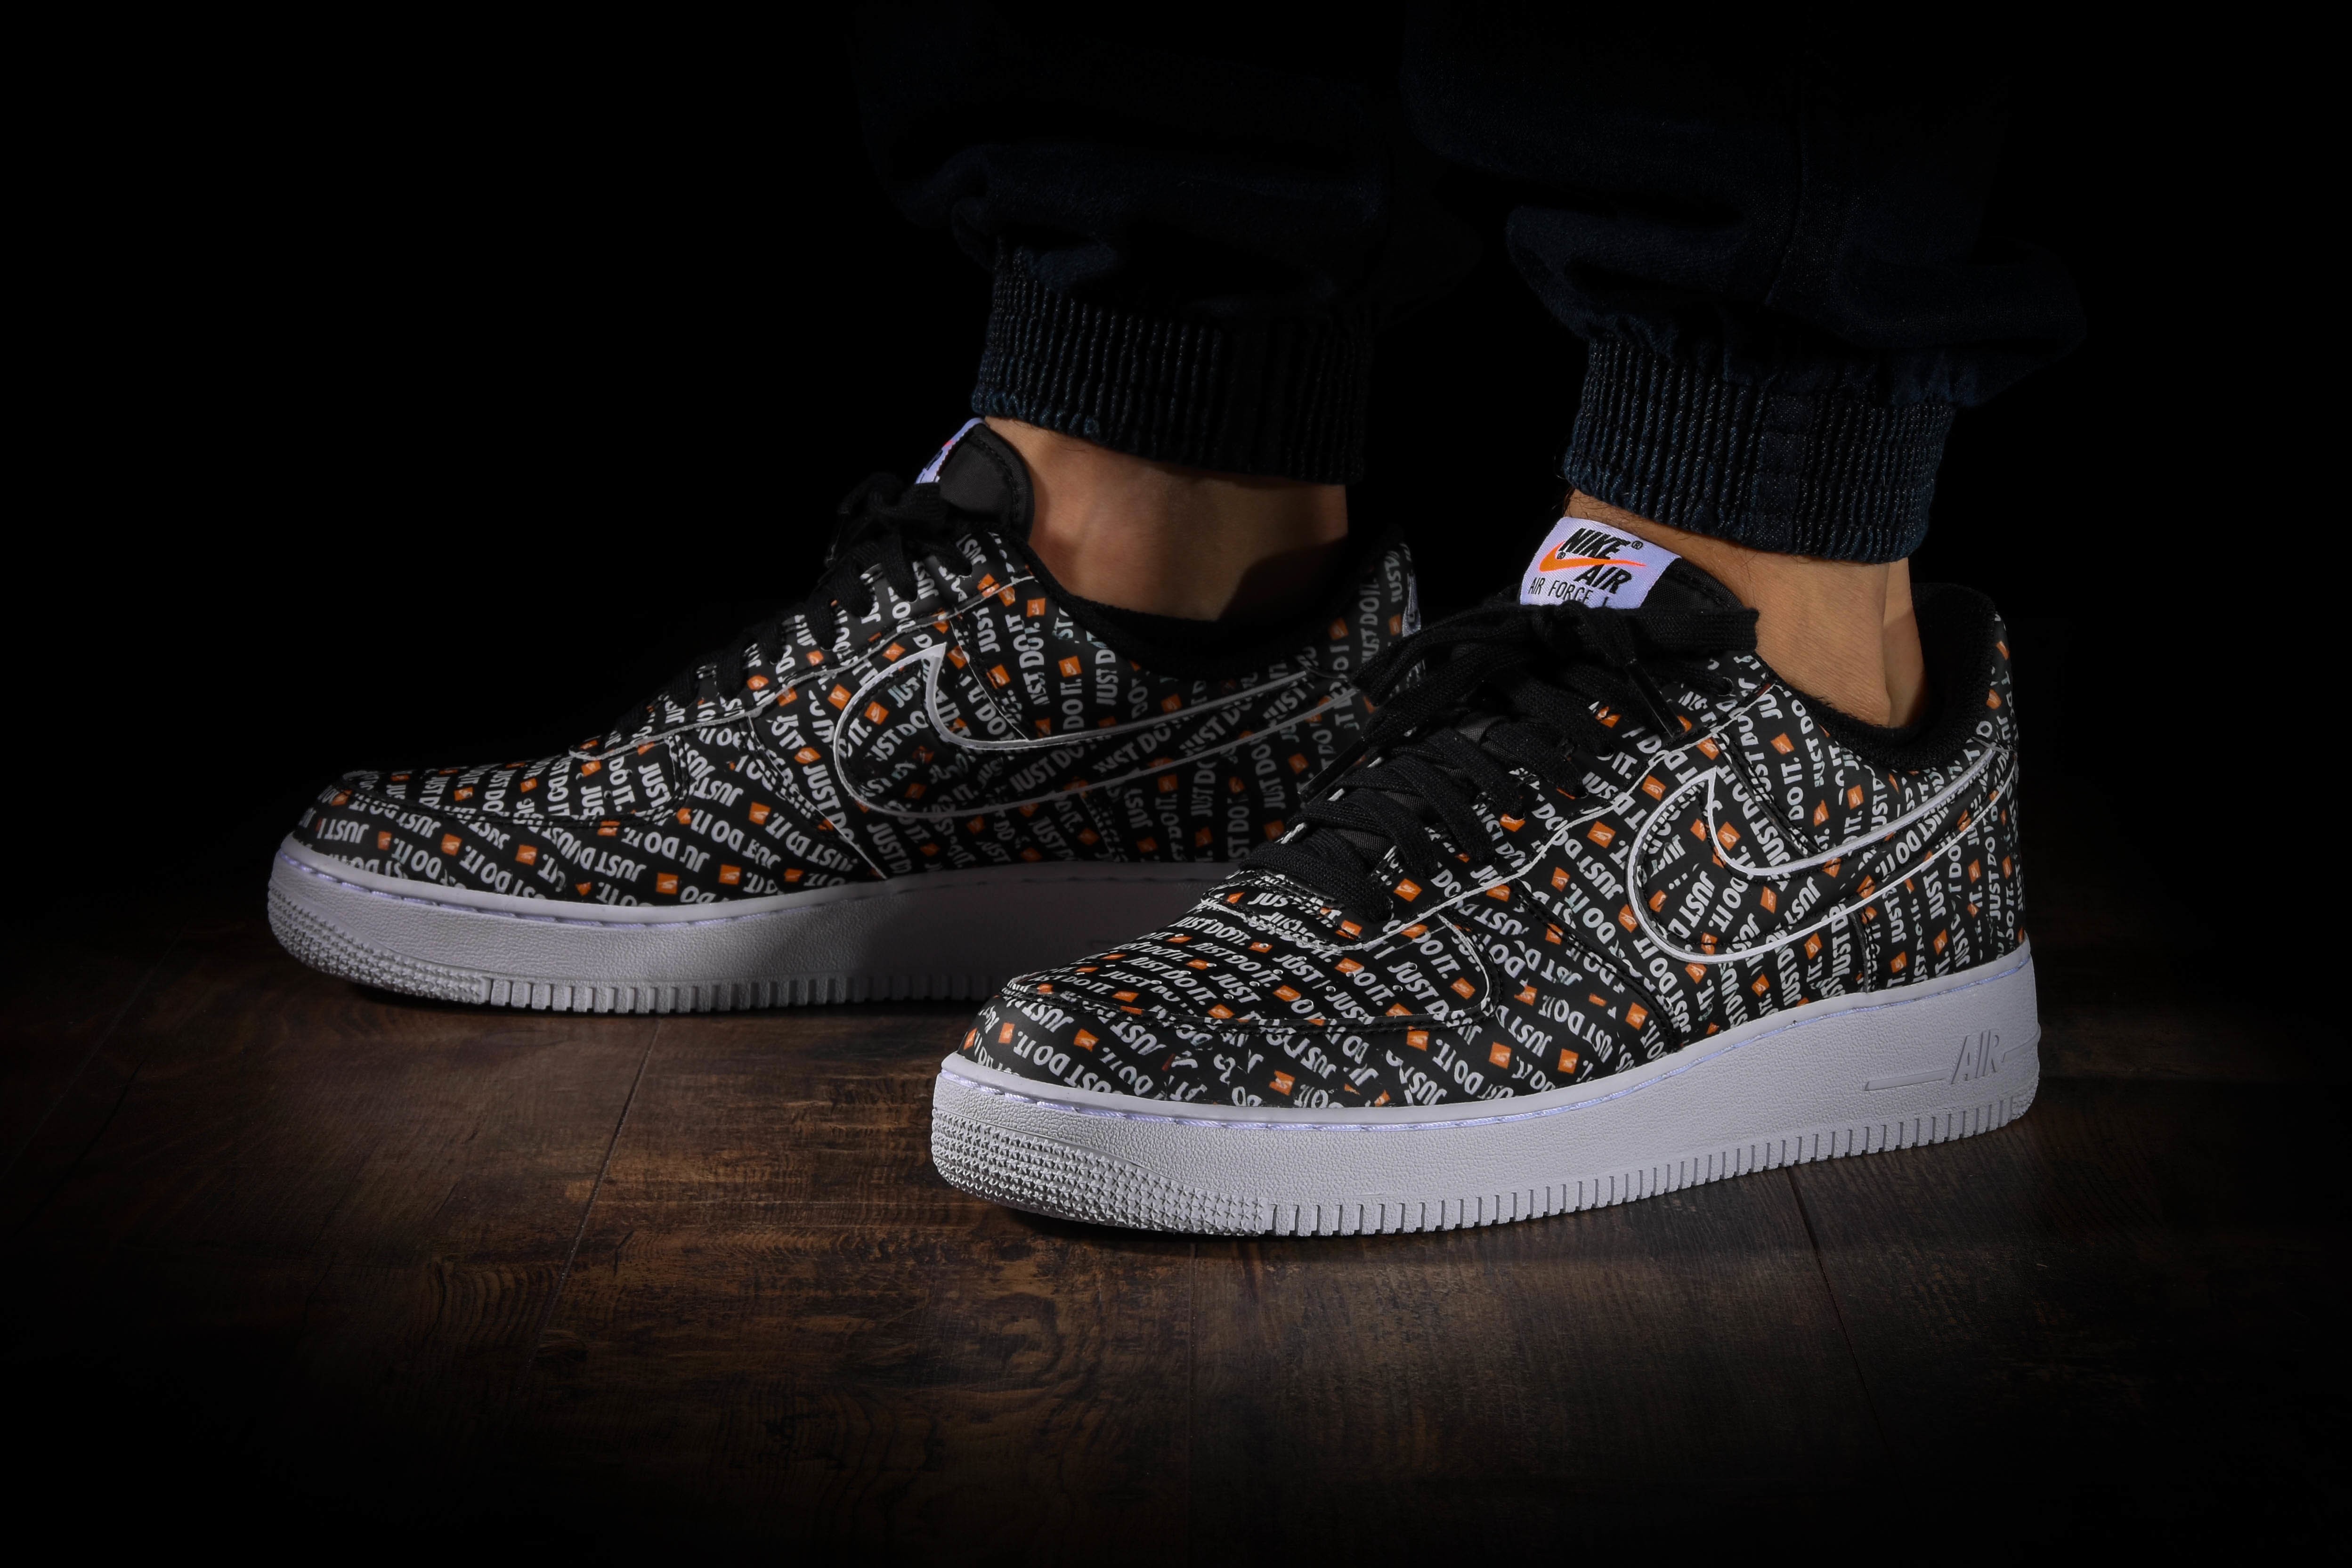 NIKE AIR FORCE 1 '07 LV8 JDI for £90.00 